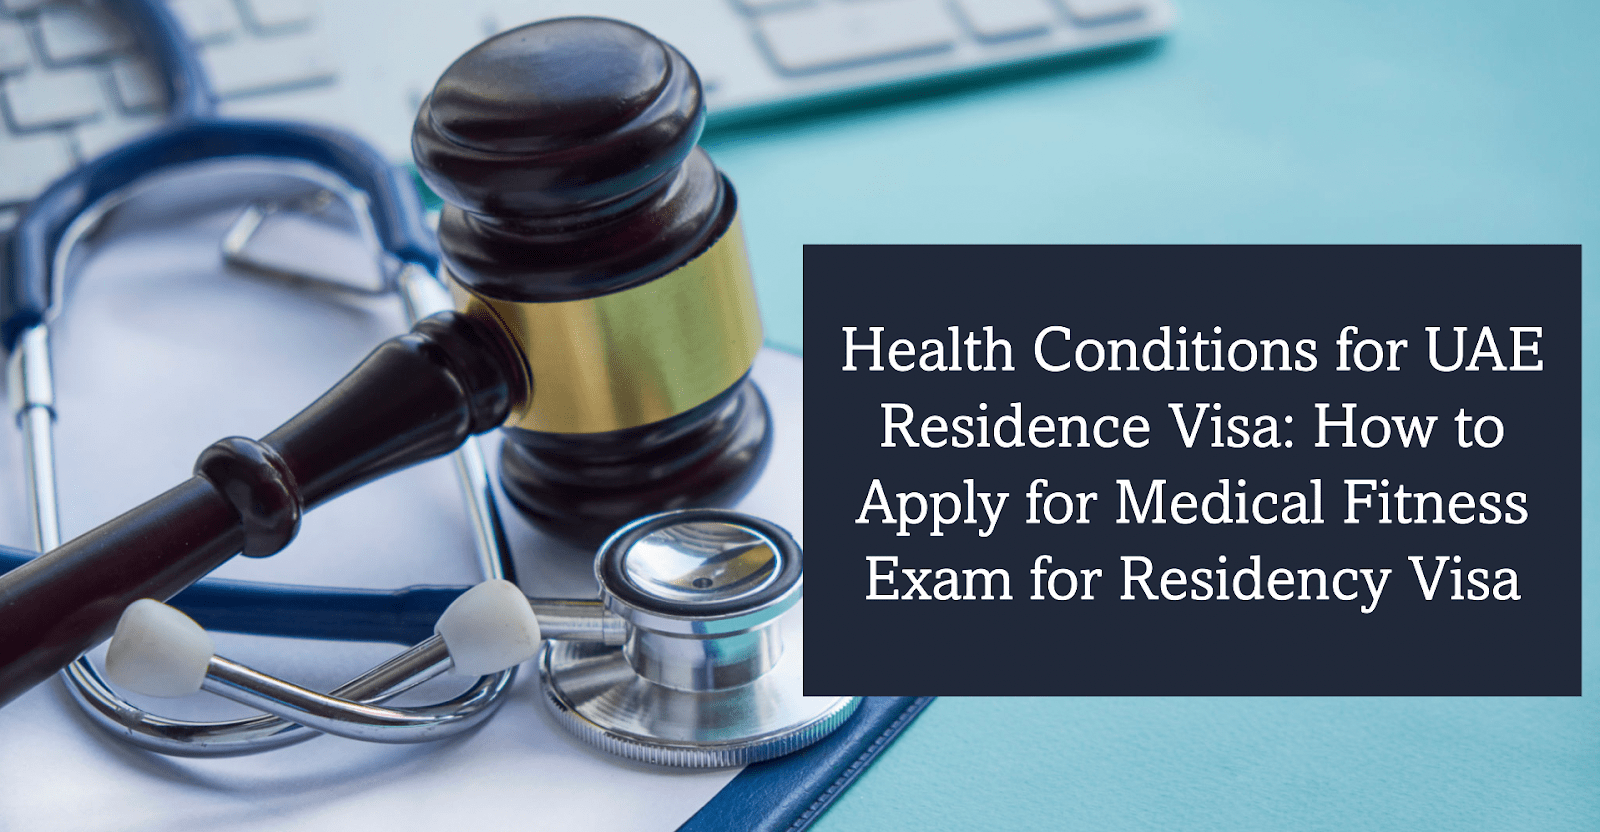 How to Apply for a Medical Test for a Residency Visa in UAE?